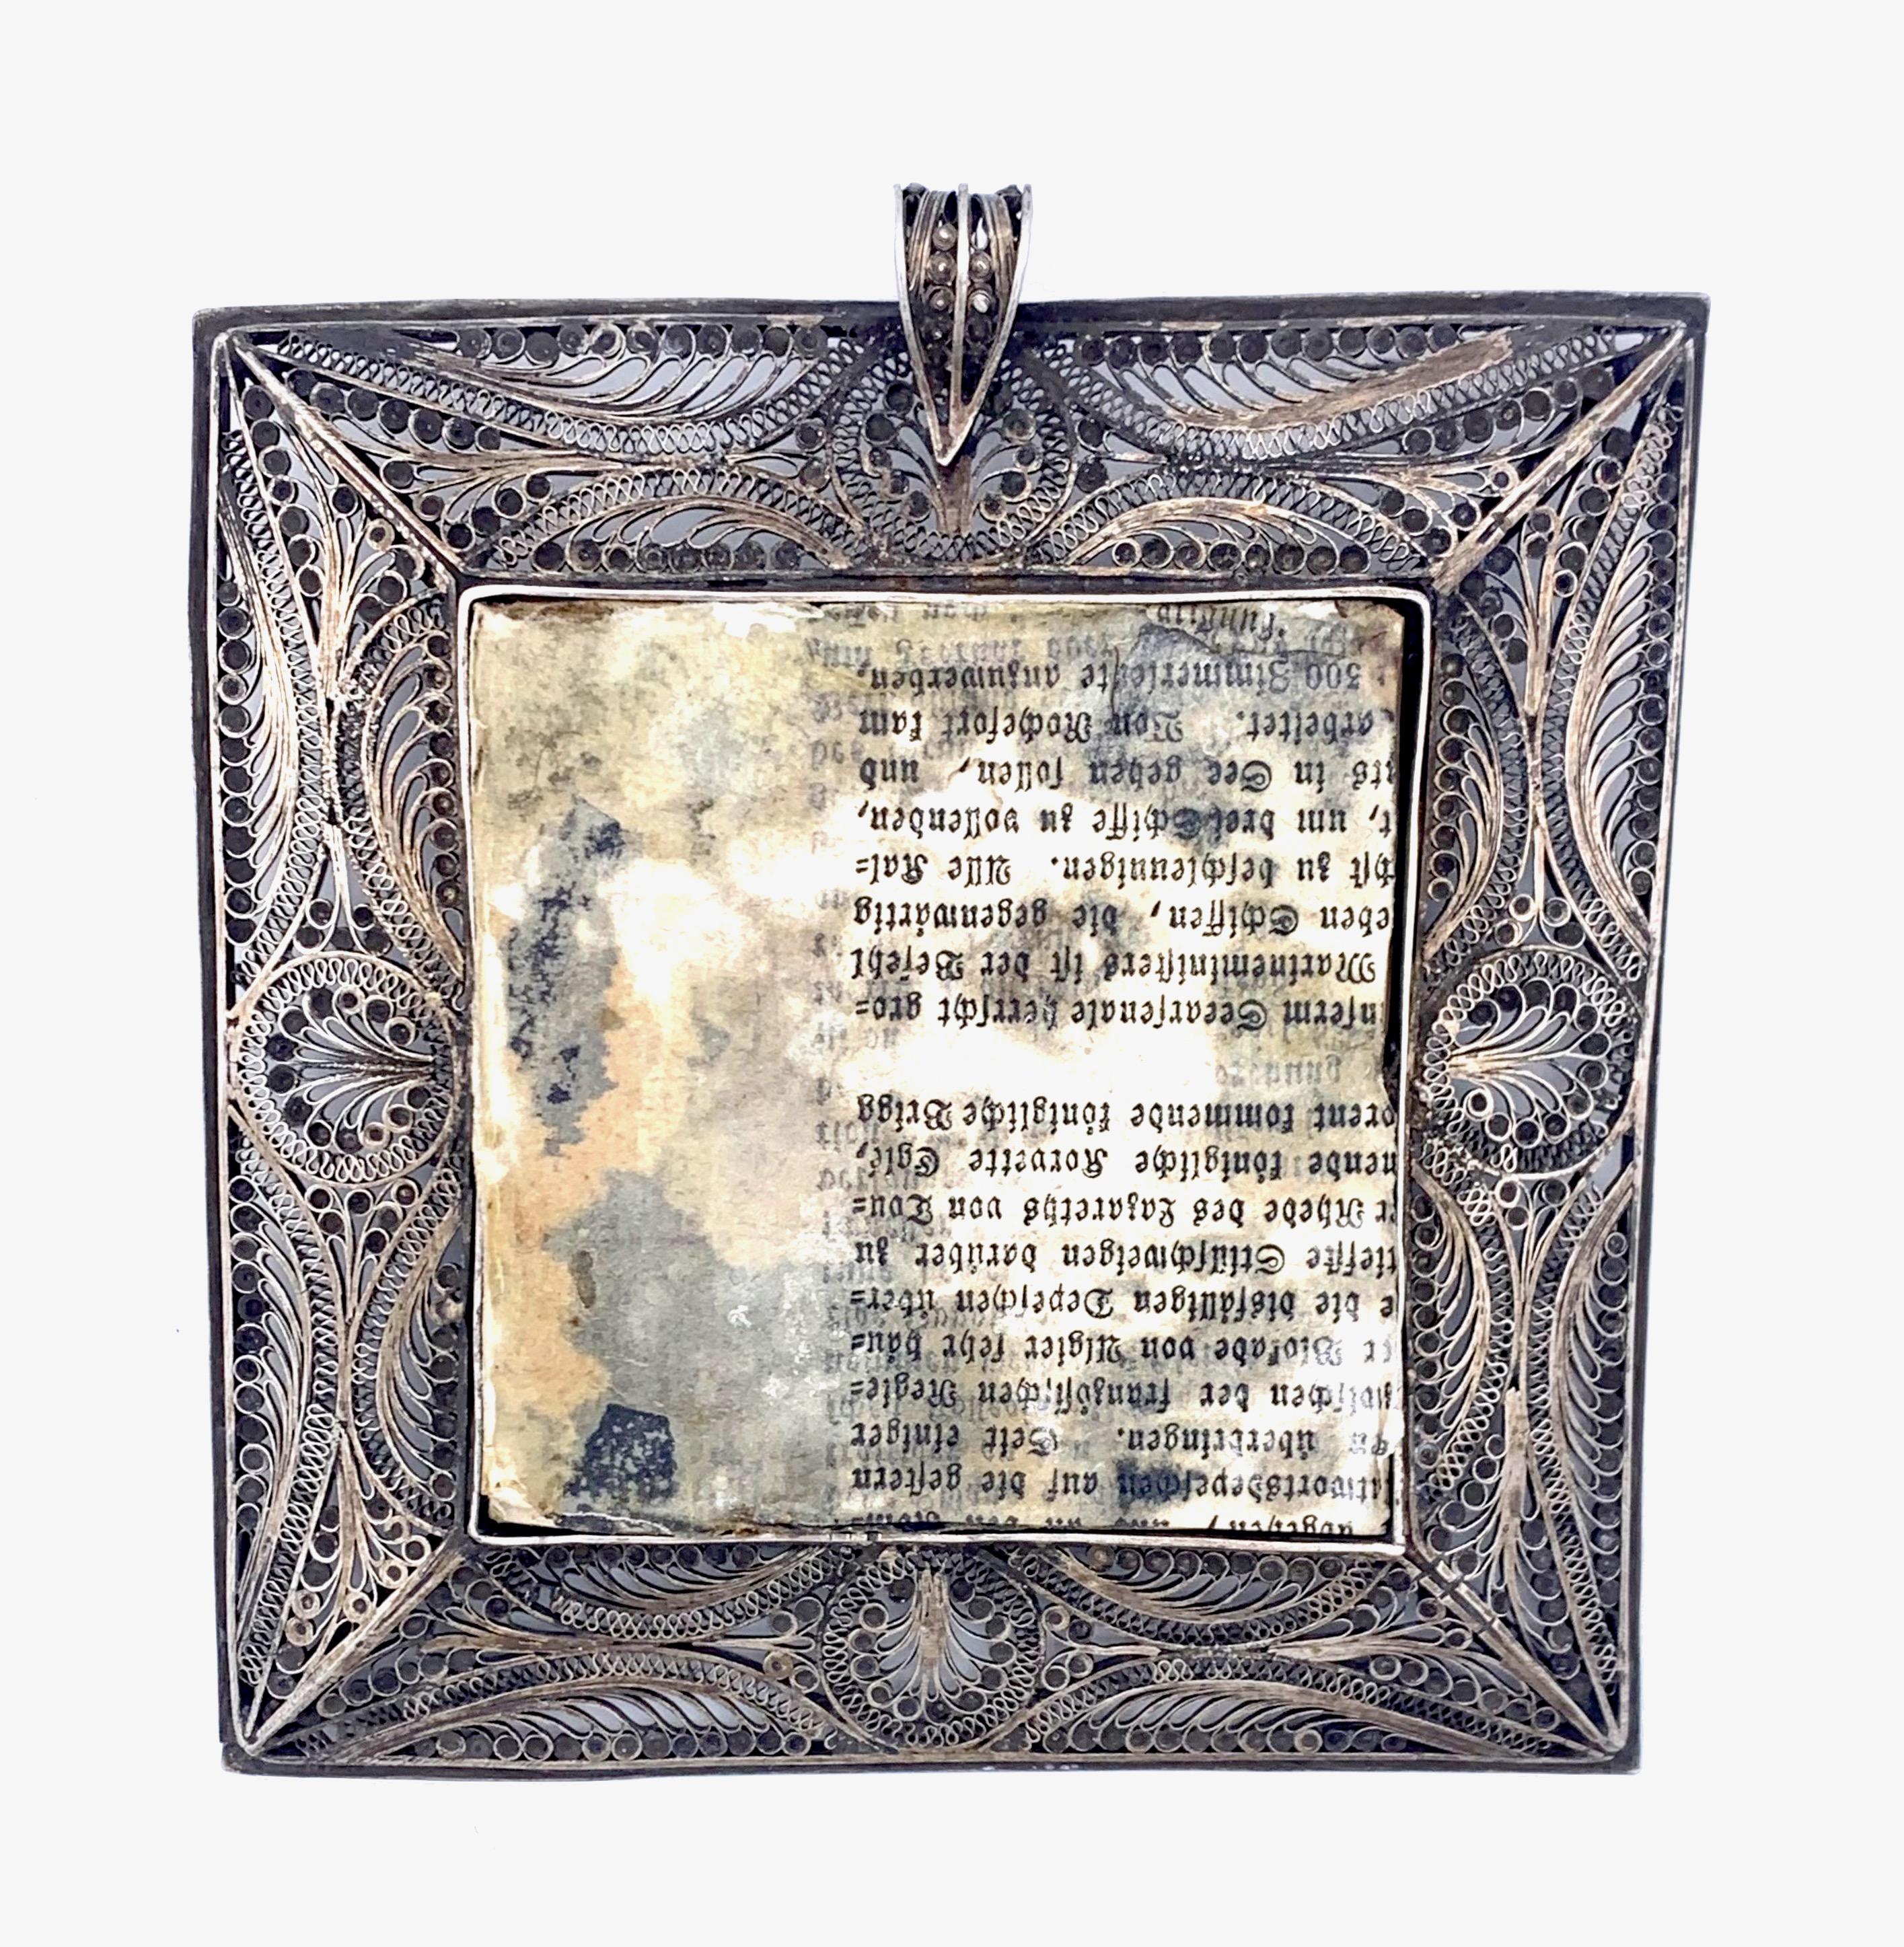 This miniature relief portrait of King Ludwig I. of Bavaria is made out of chased silver. I has been executed by Ludwig Leigh and is signed L.Leigh. The portrait is mounted on velvet in a silver filigree frame.
King Ludwig I. was famous for his